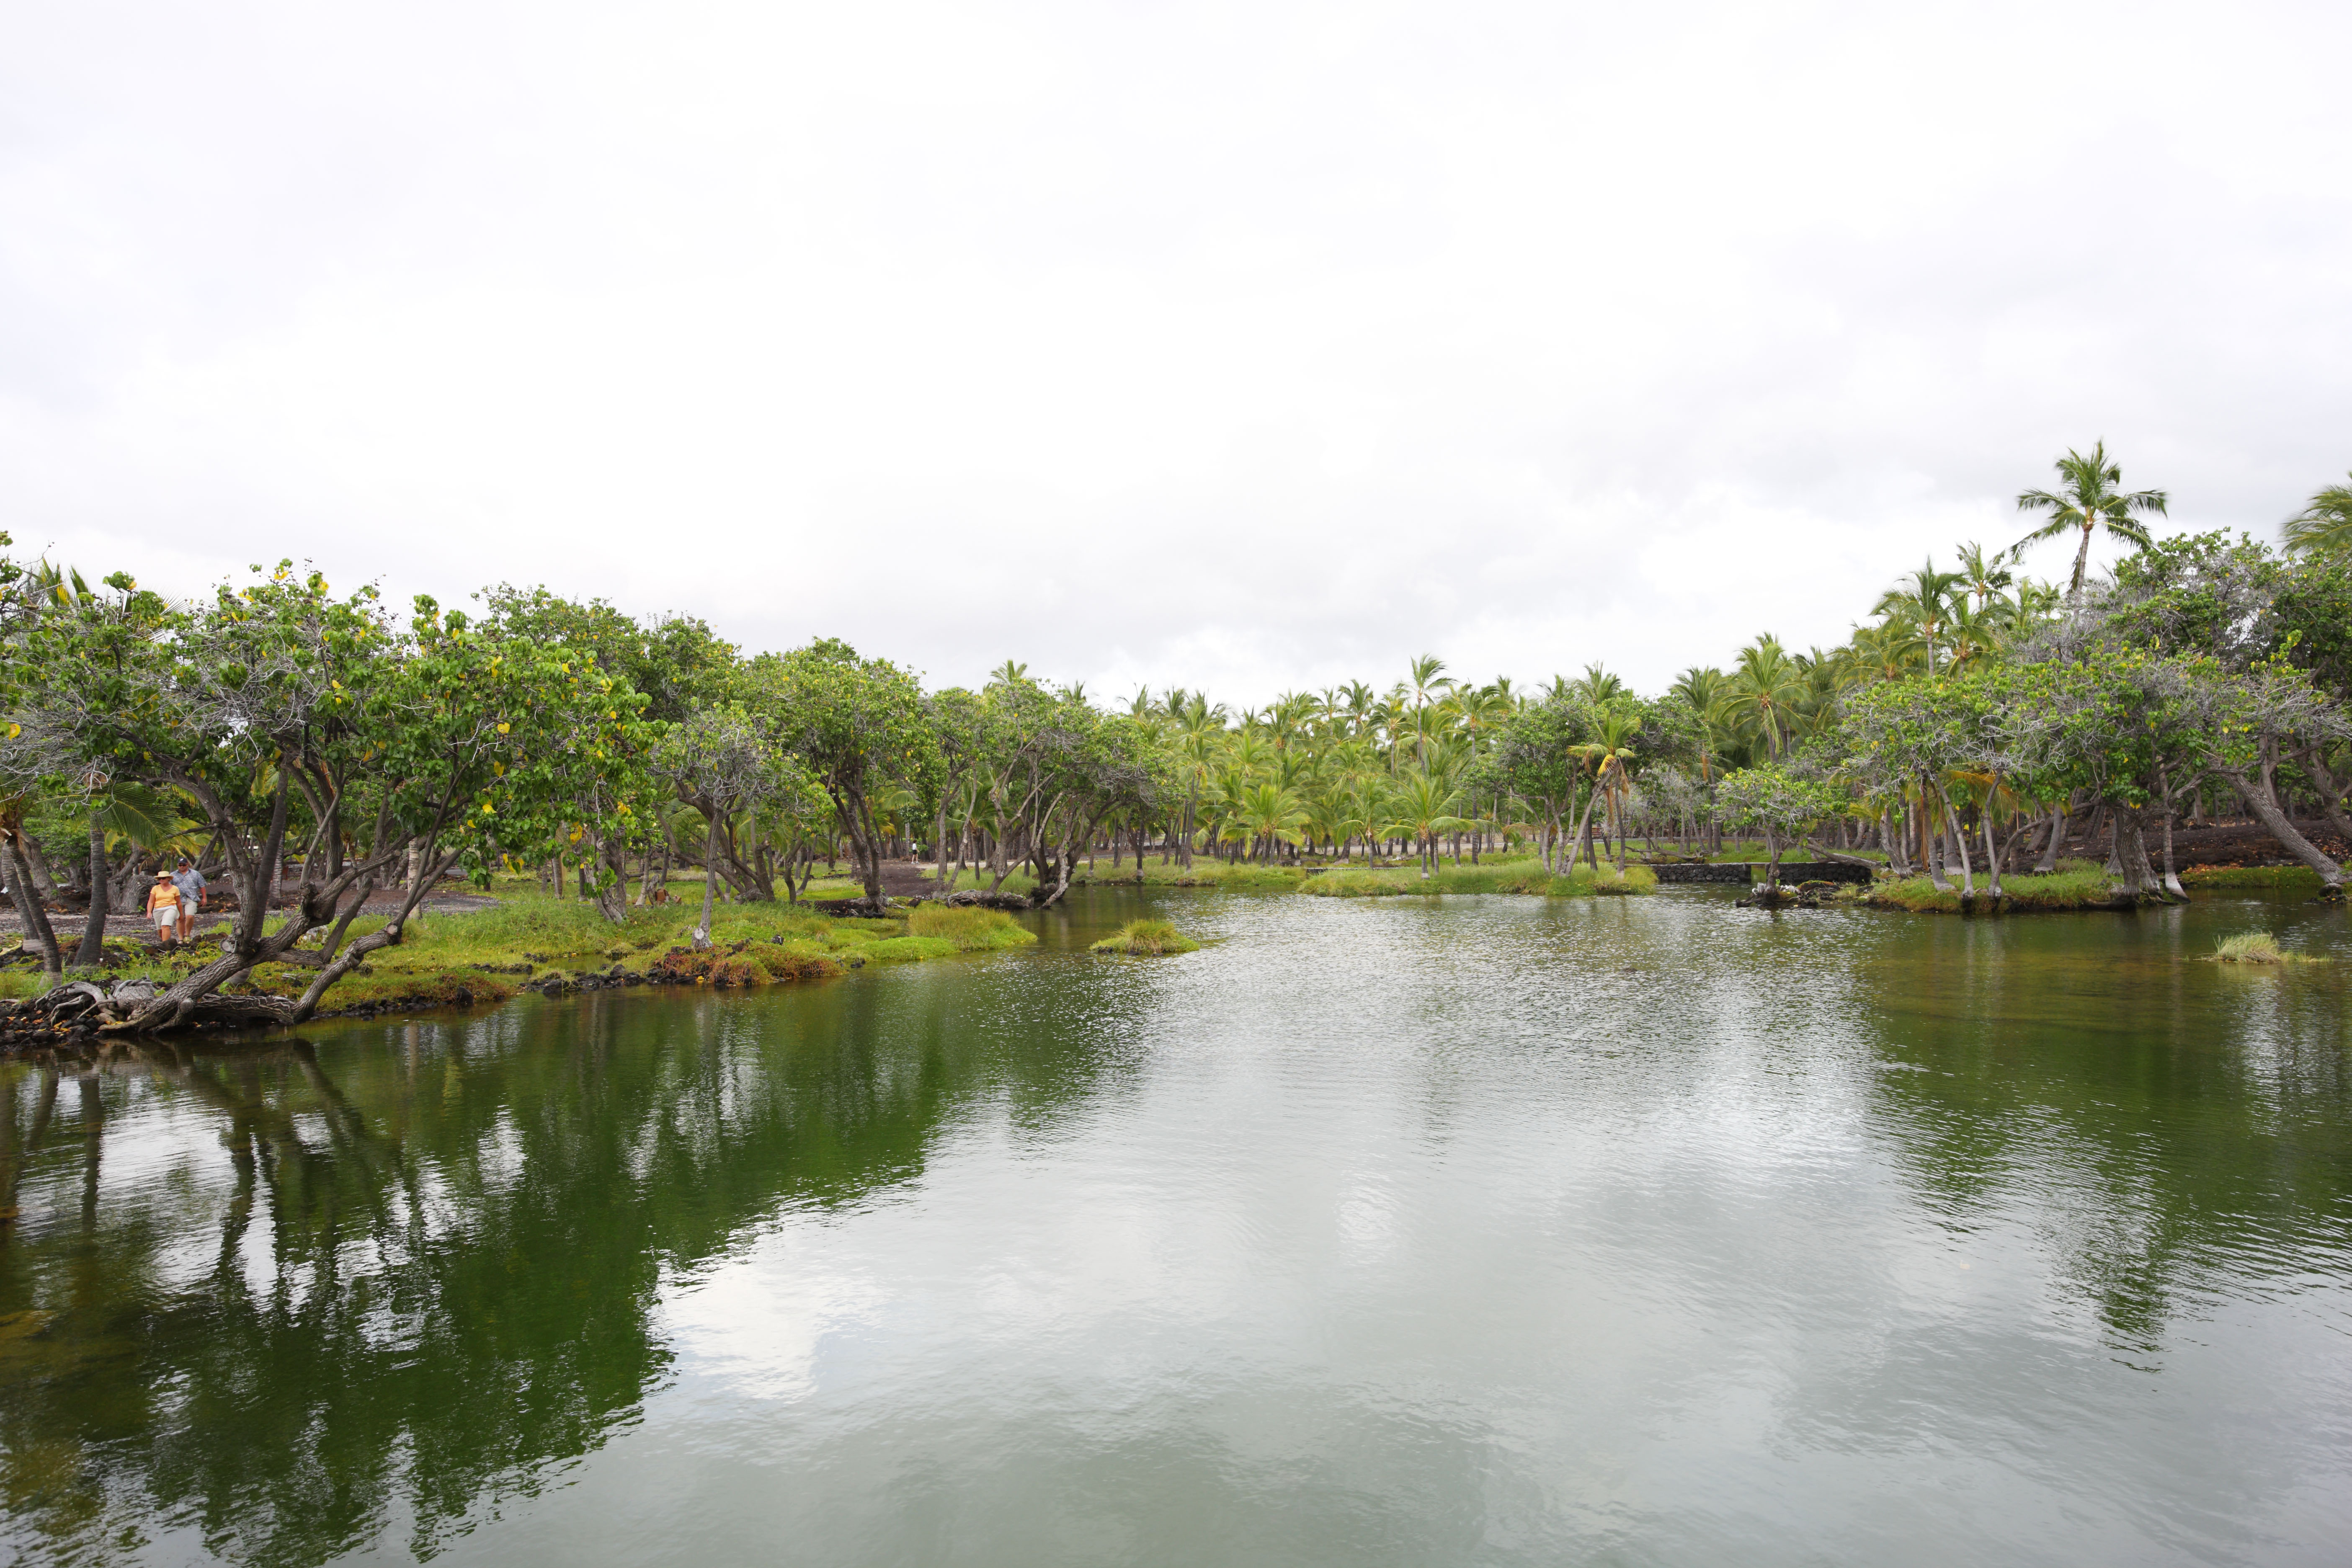 photo,material,free,landscape,picture,stock photo,Creative Commons,MaunaLani fish pound, Lava, An altar, pond, Fishery